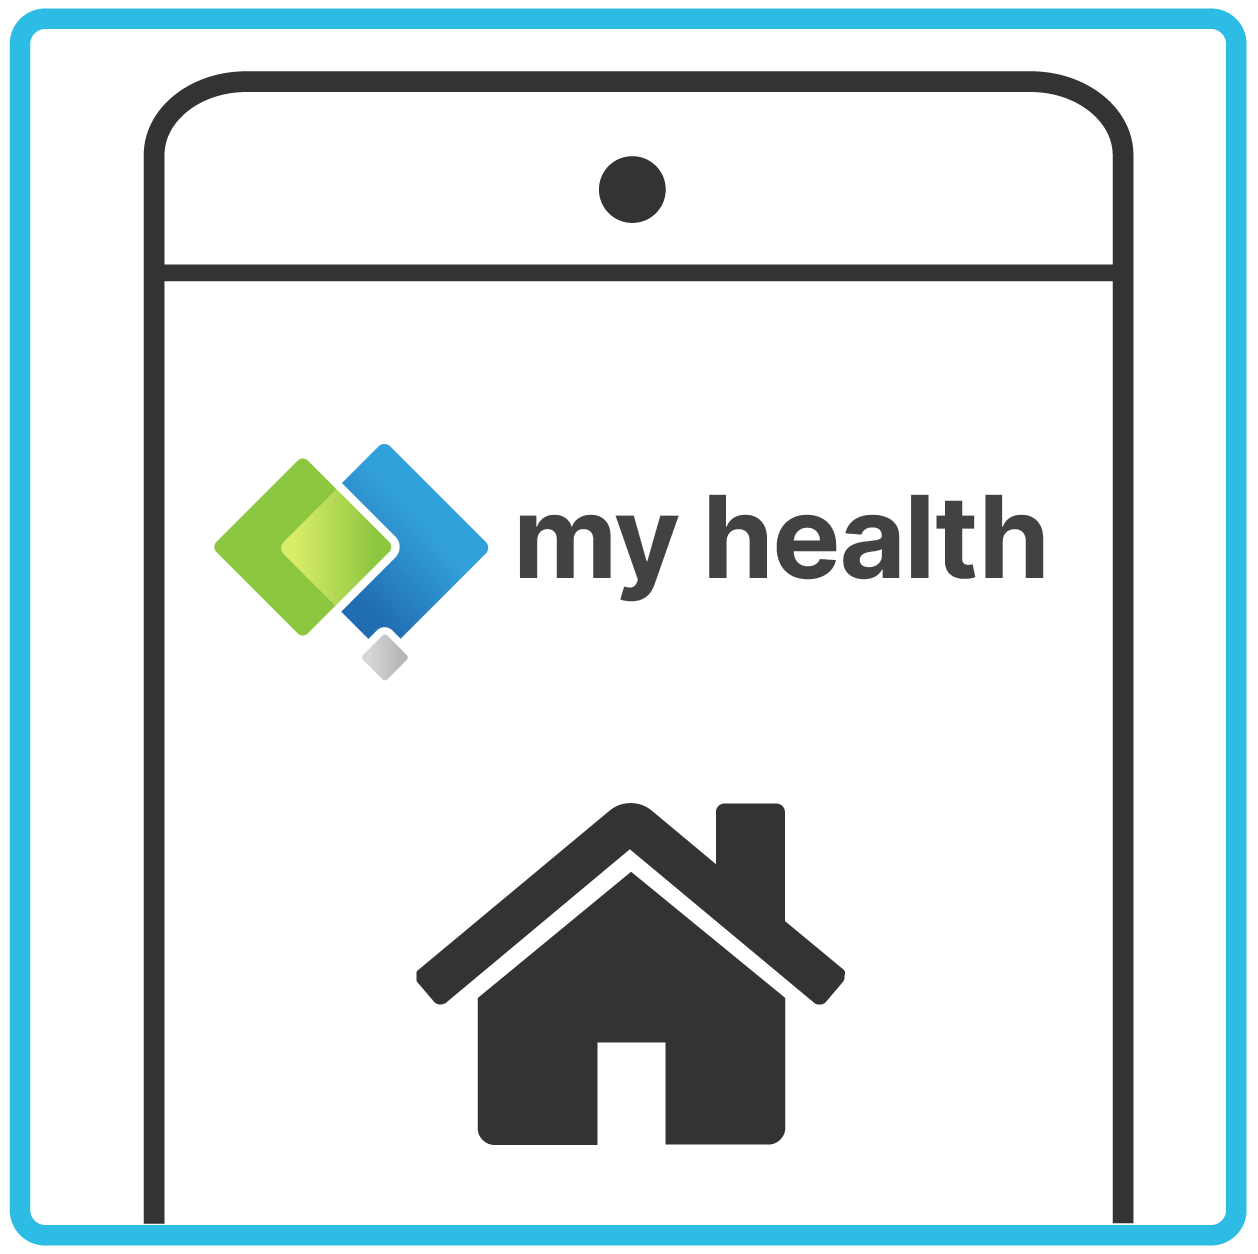 Exploring the my health app home screen